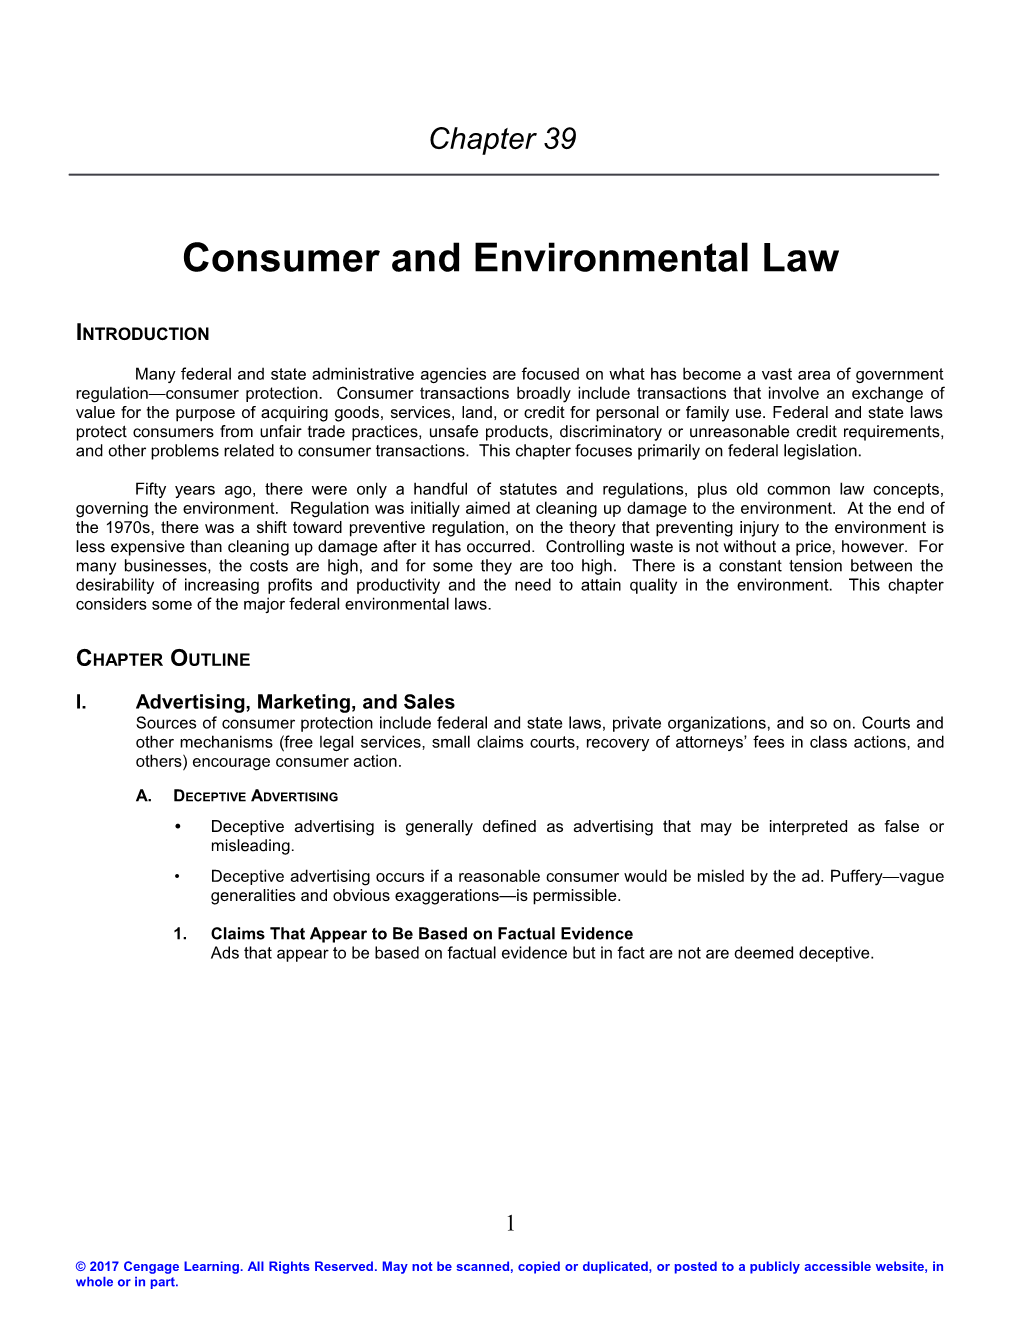 Chapter 39: Consumer and Environmental Law 1